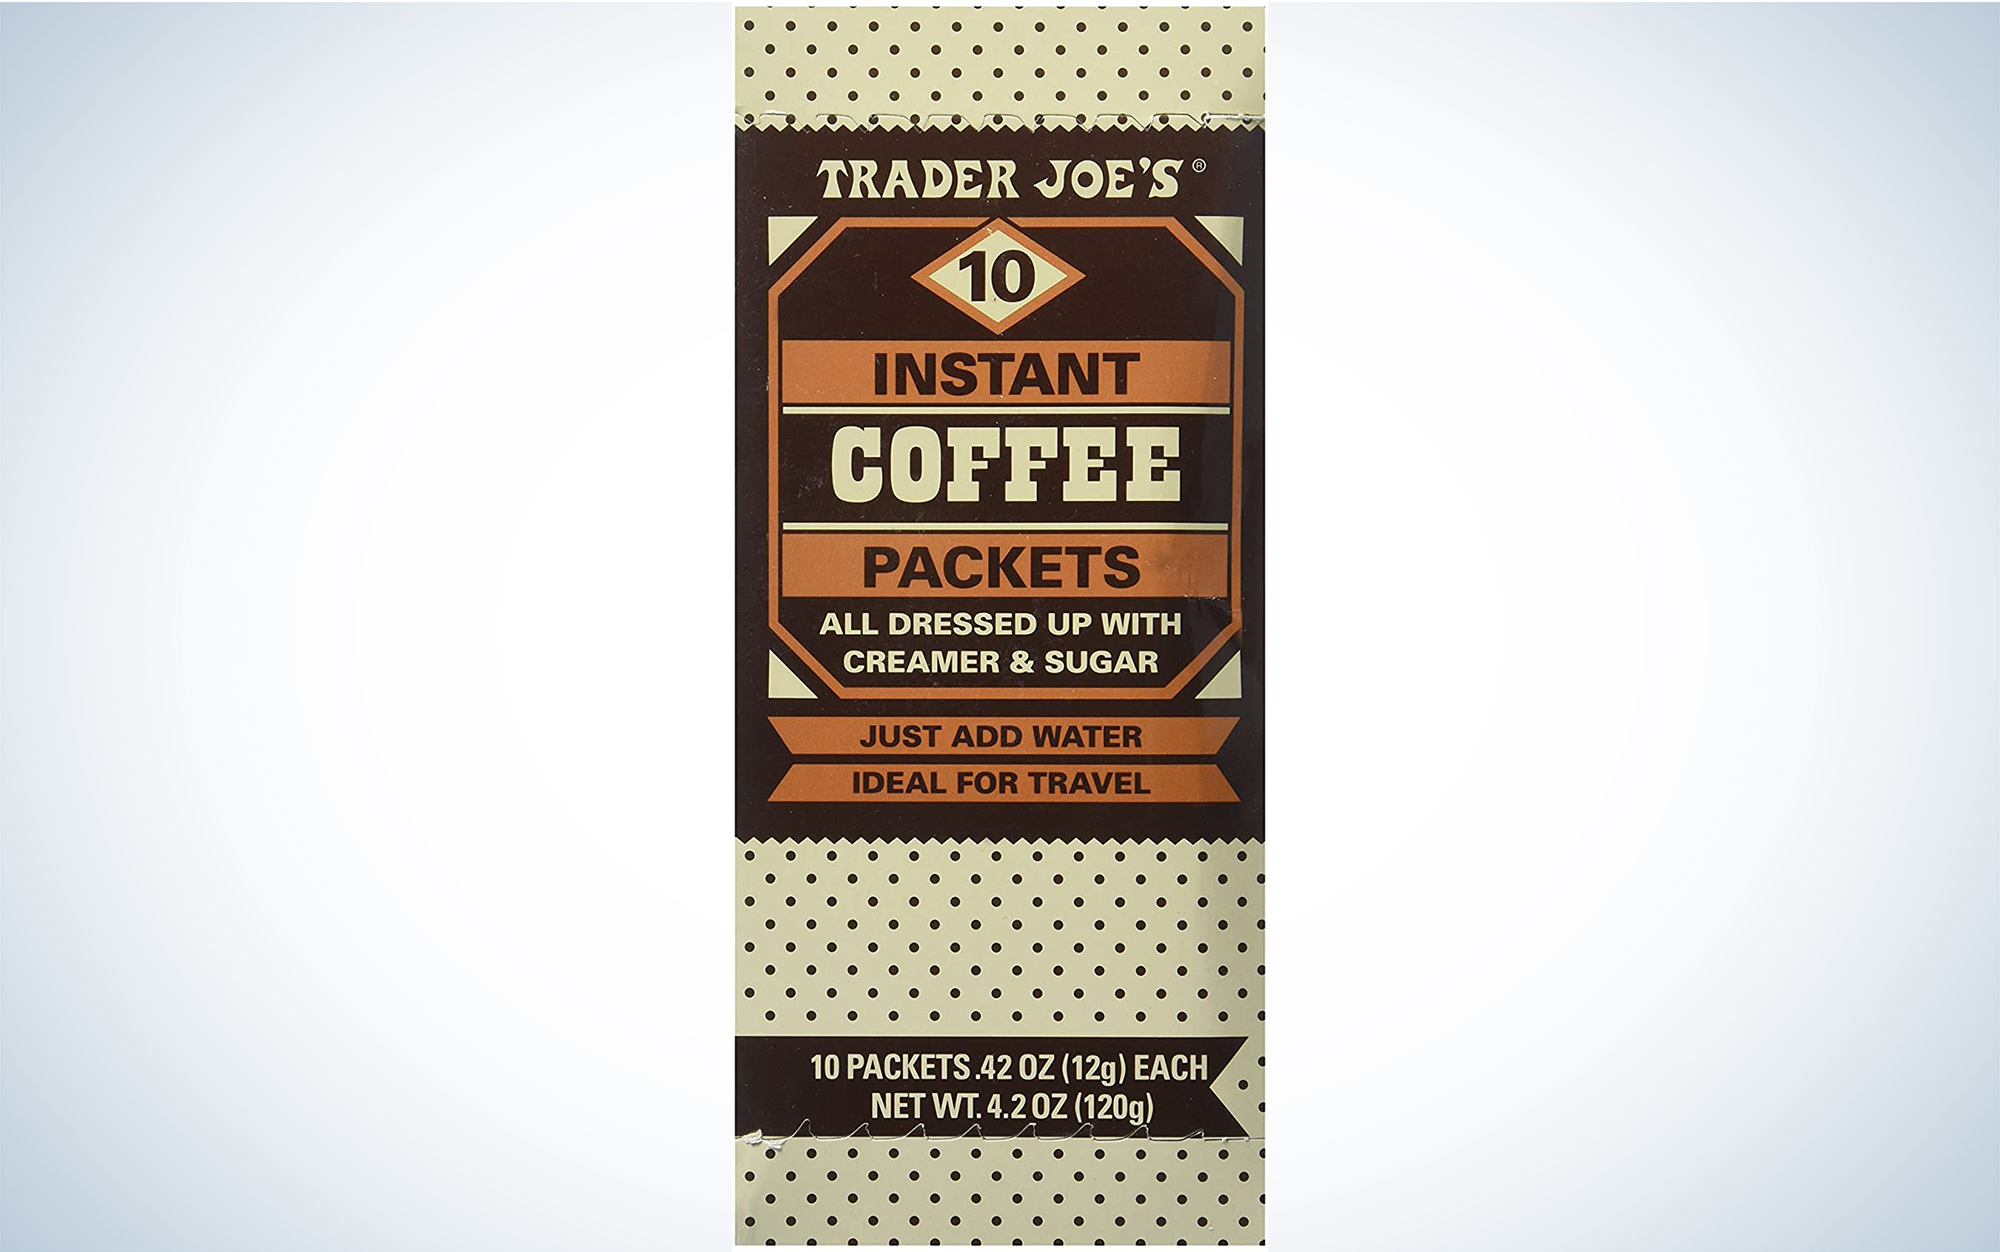 Trader Joe's Instant Coffee Packets with Creamer & Sugar is the best backpacking coffee.